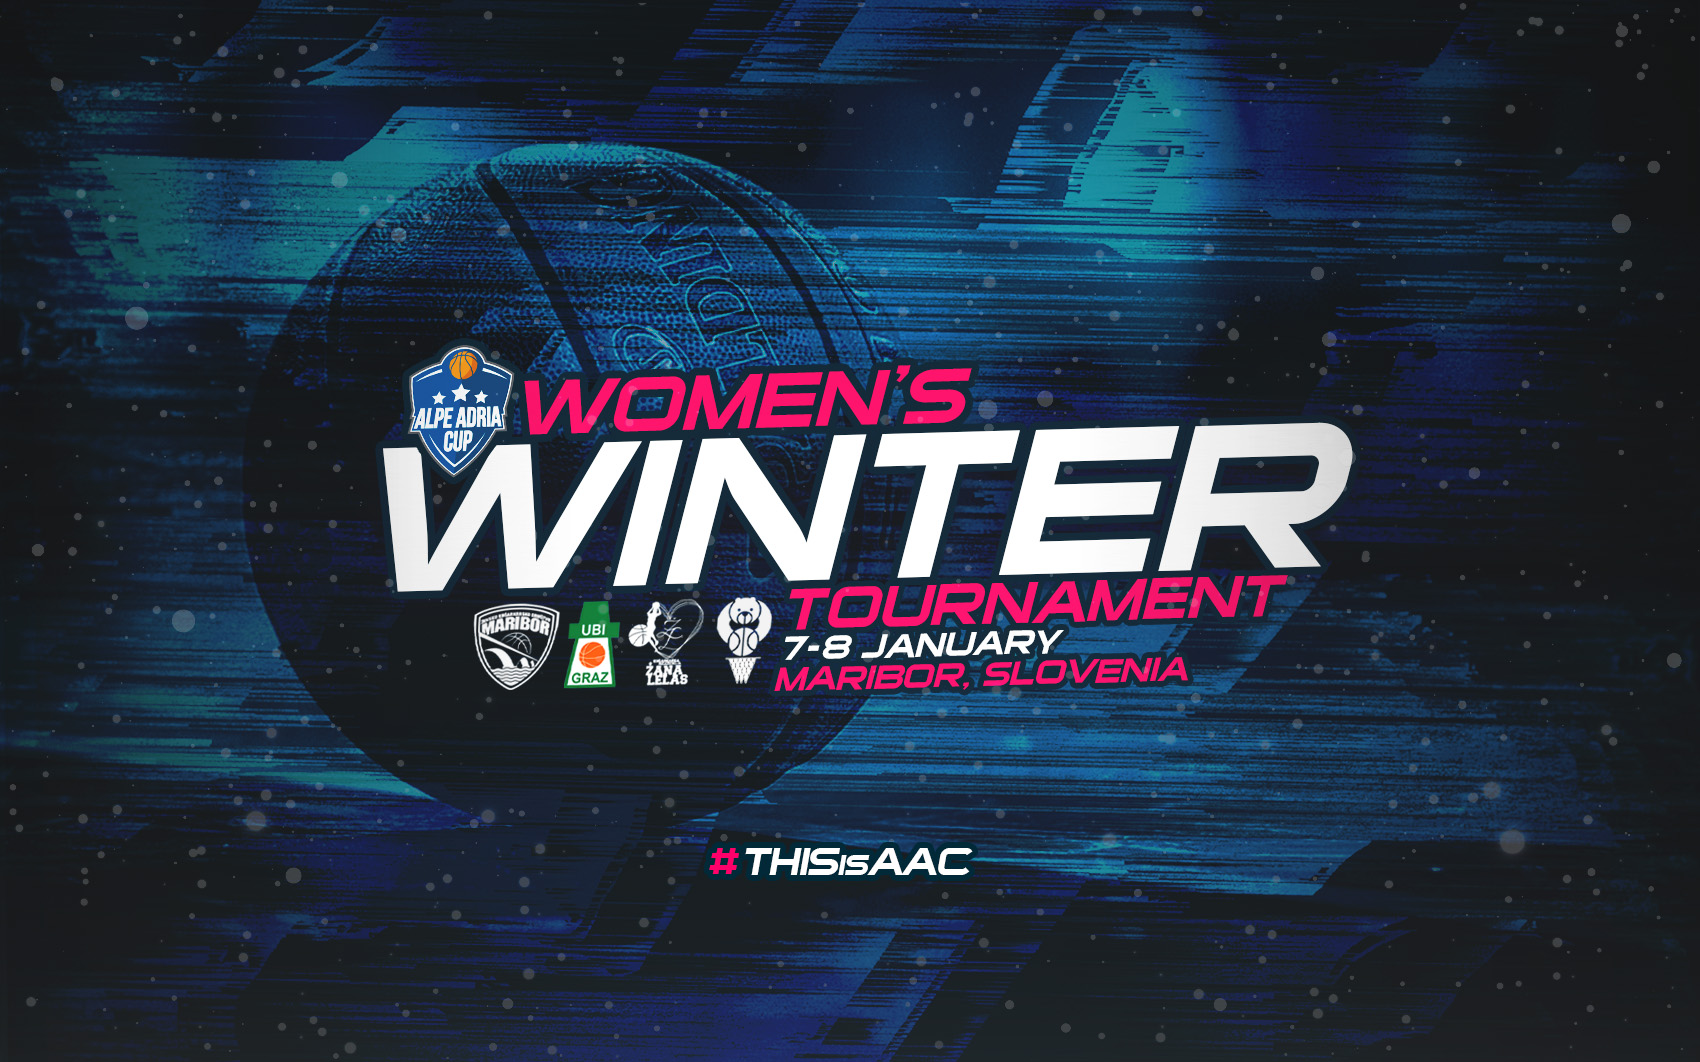 AAC goes to make history, the women’s version of the competition premieres in January!